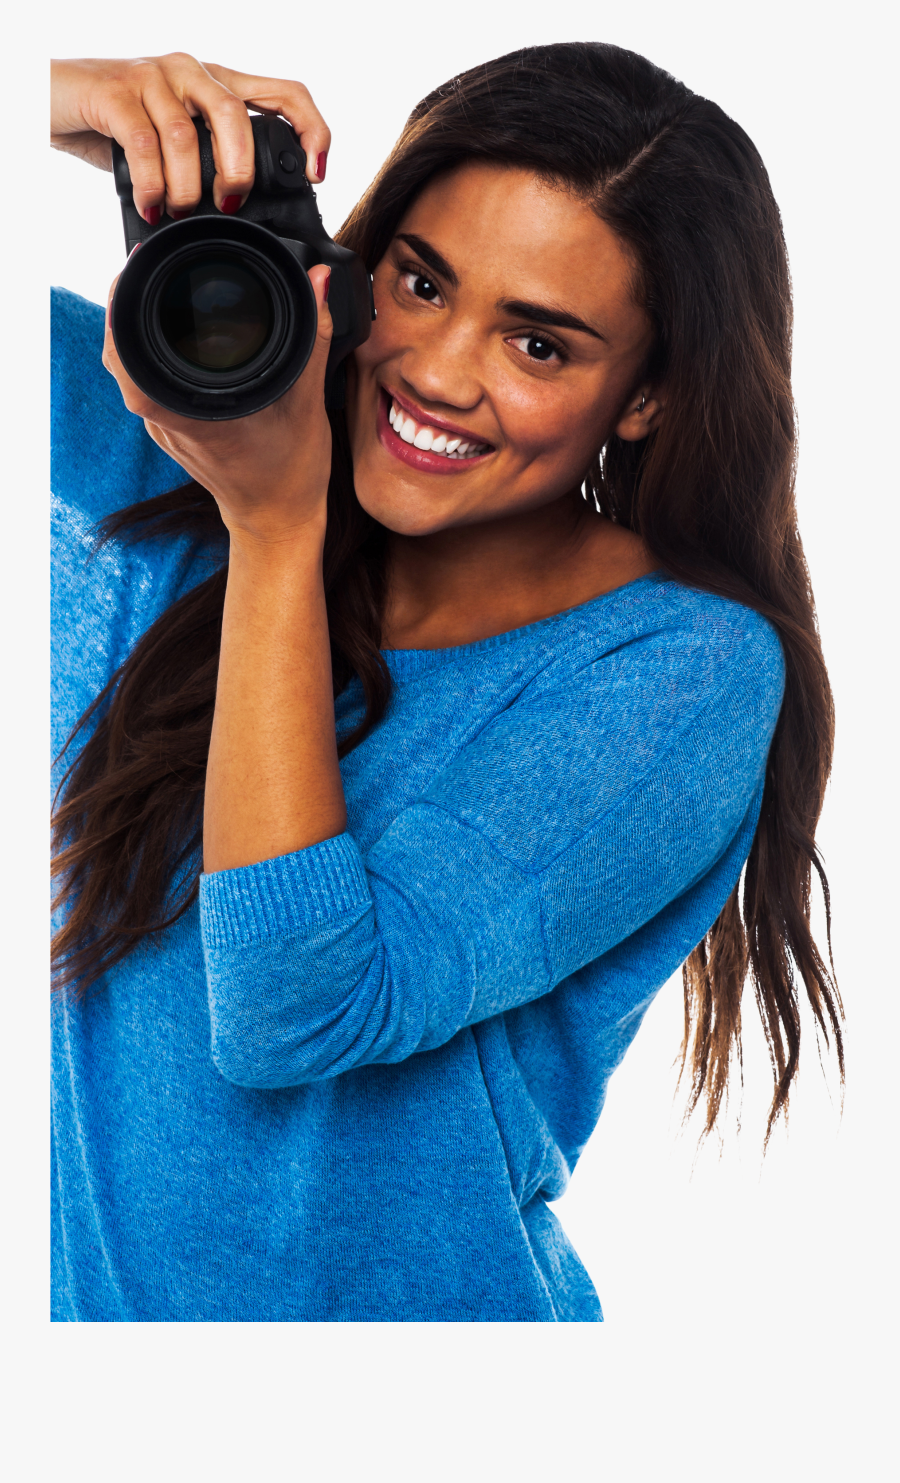 Female Photographer Png , Transparent Cartoons - Free Female Images For Commercial Use, Transparent Clipart